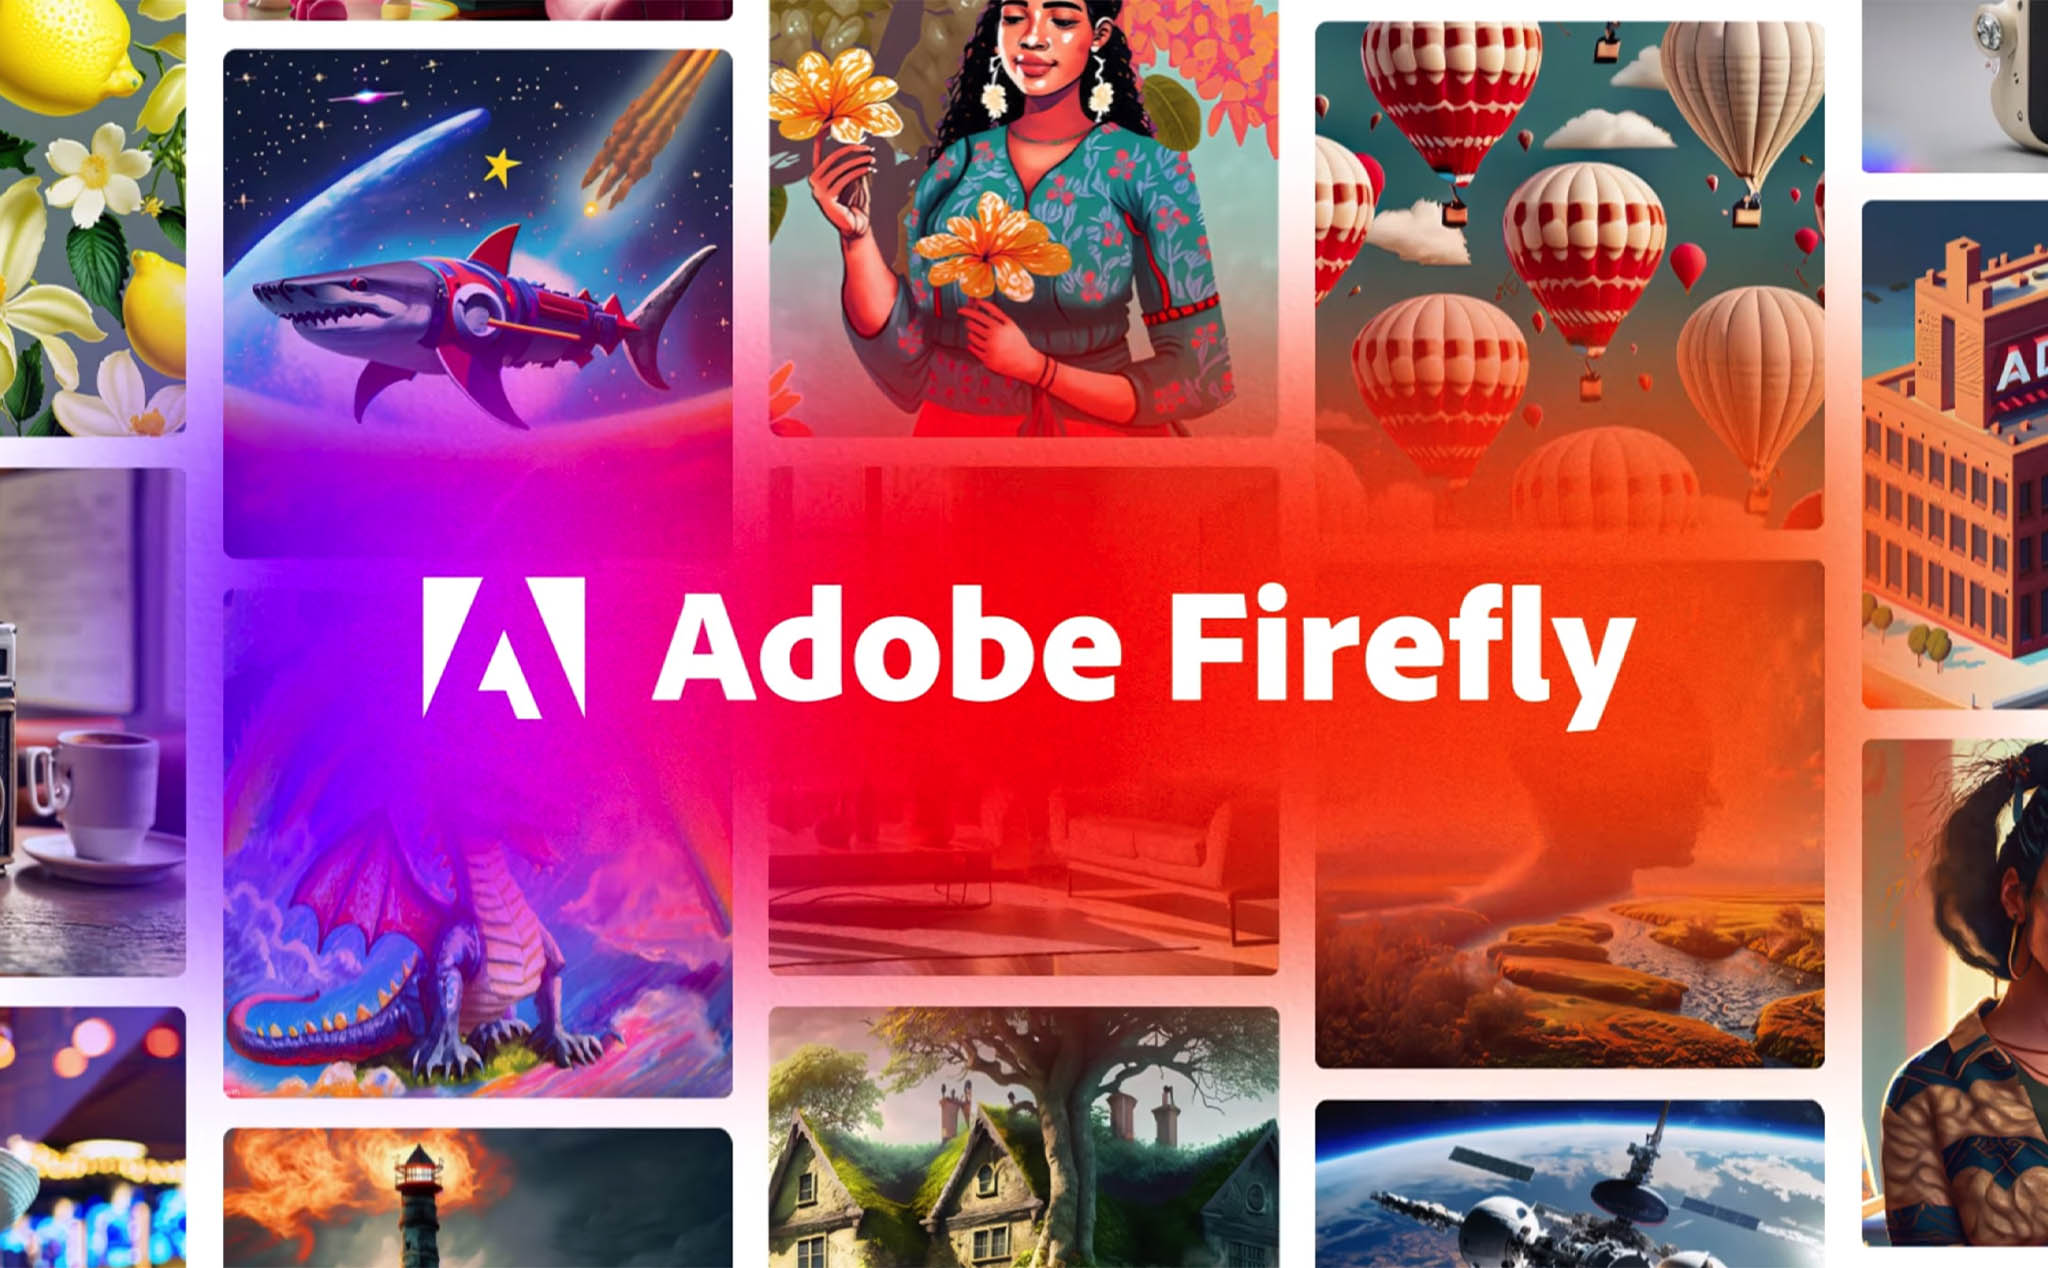 Microsoft and Adobe reveal their new AI image generators, Bing image creator and Firefly